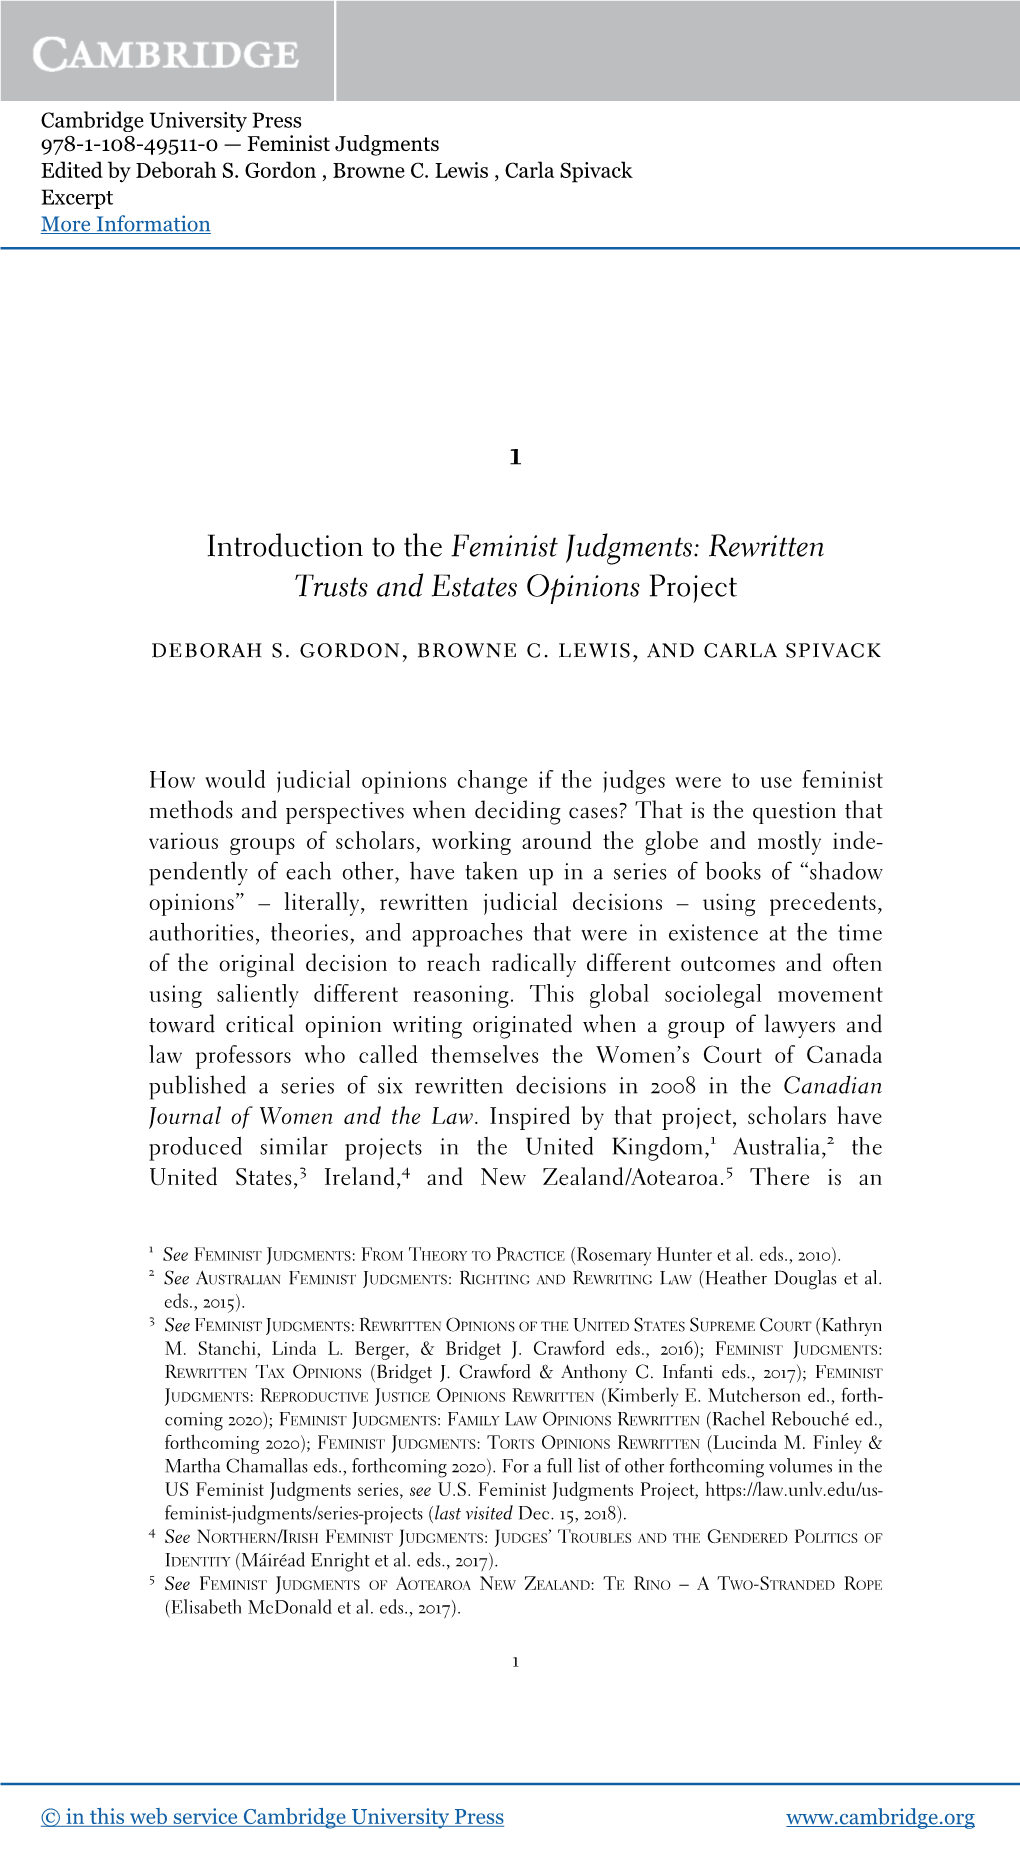 Introduction to the Feminist Judgments: Rewritten Trusts and Estates Opinions Project